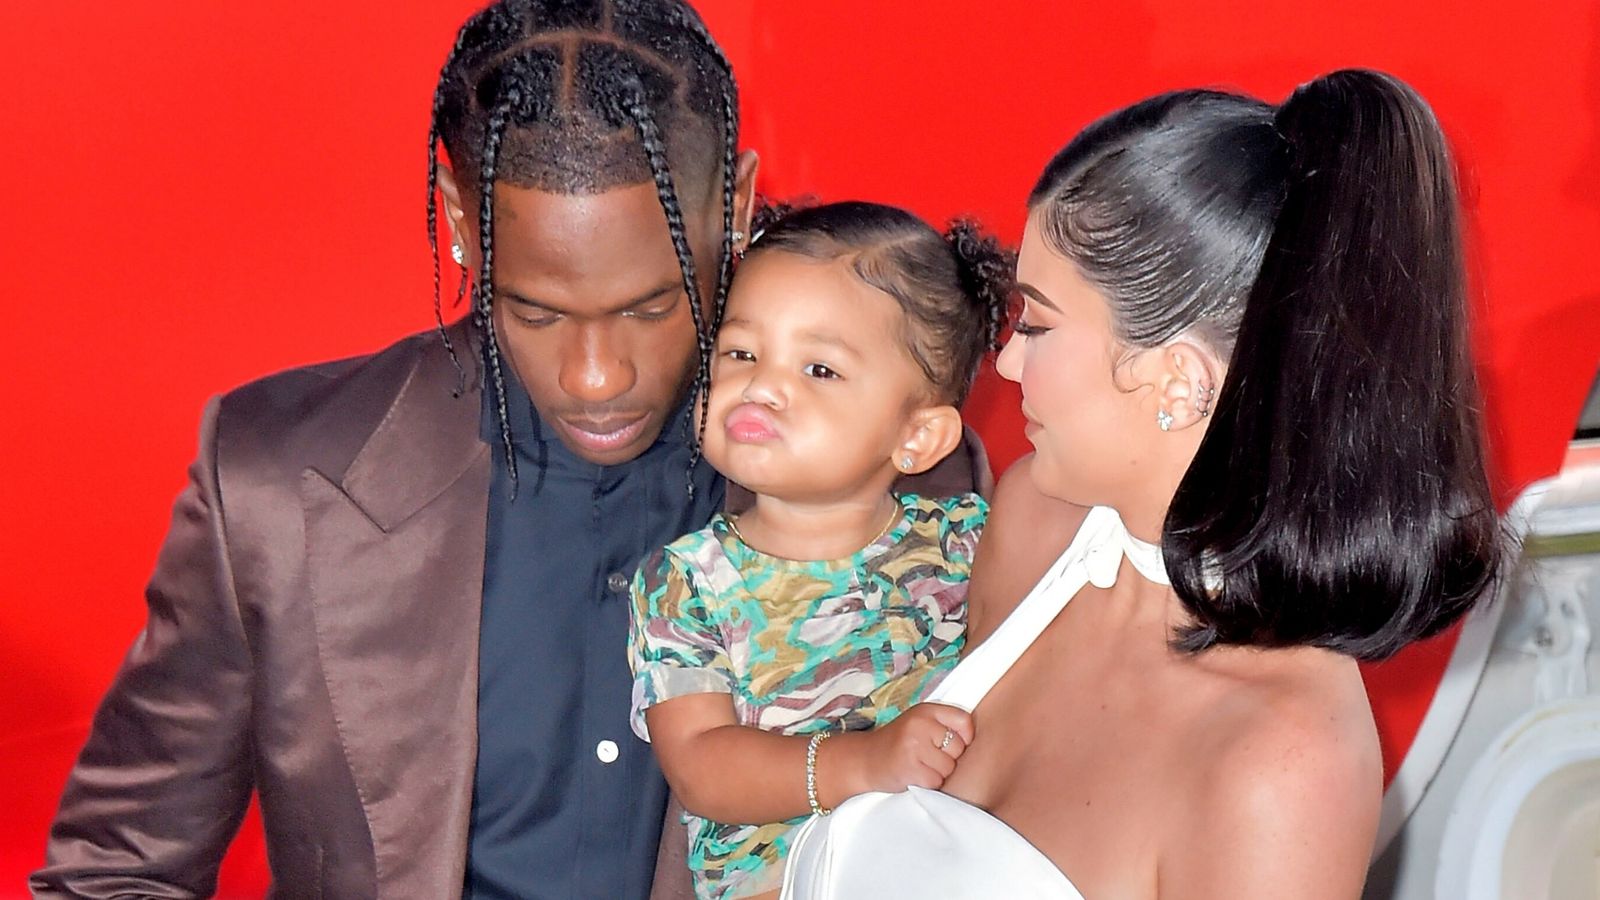 Kylie Jenner: Reality star confirms she is expecting second baby with rapper Travis Scott